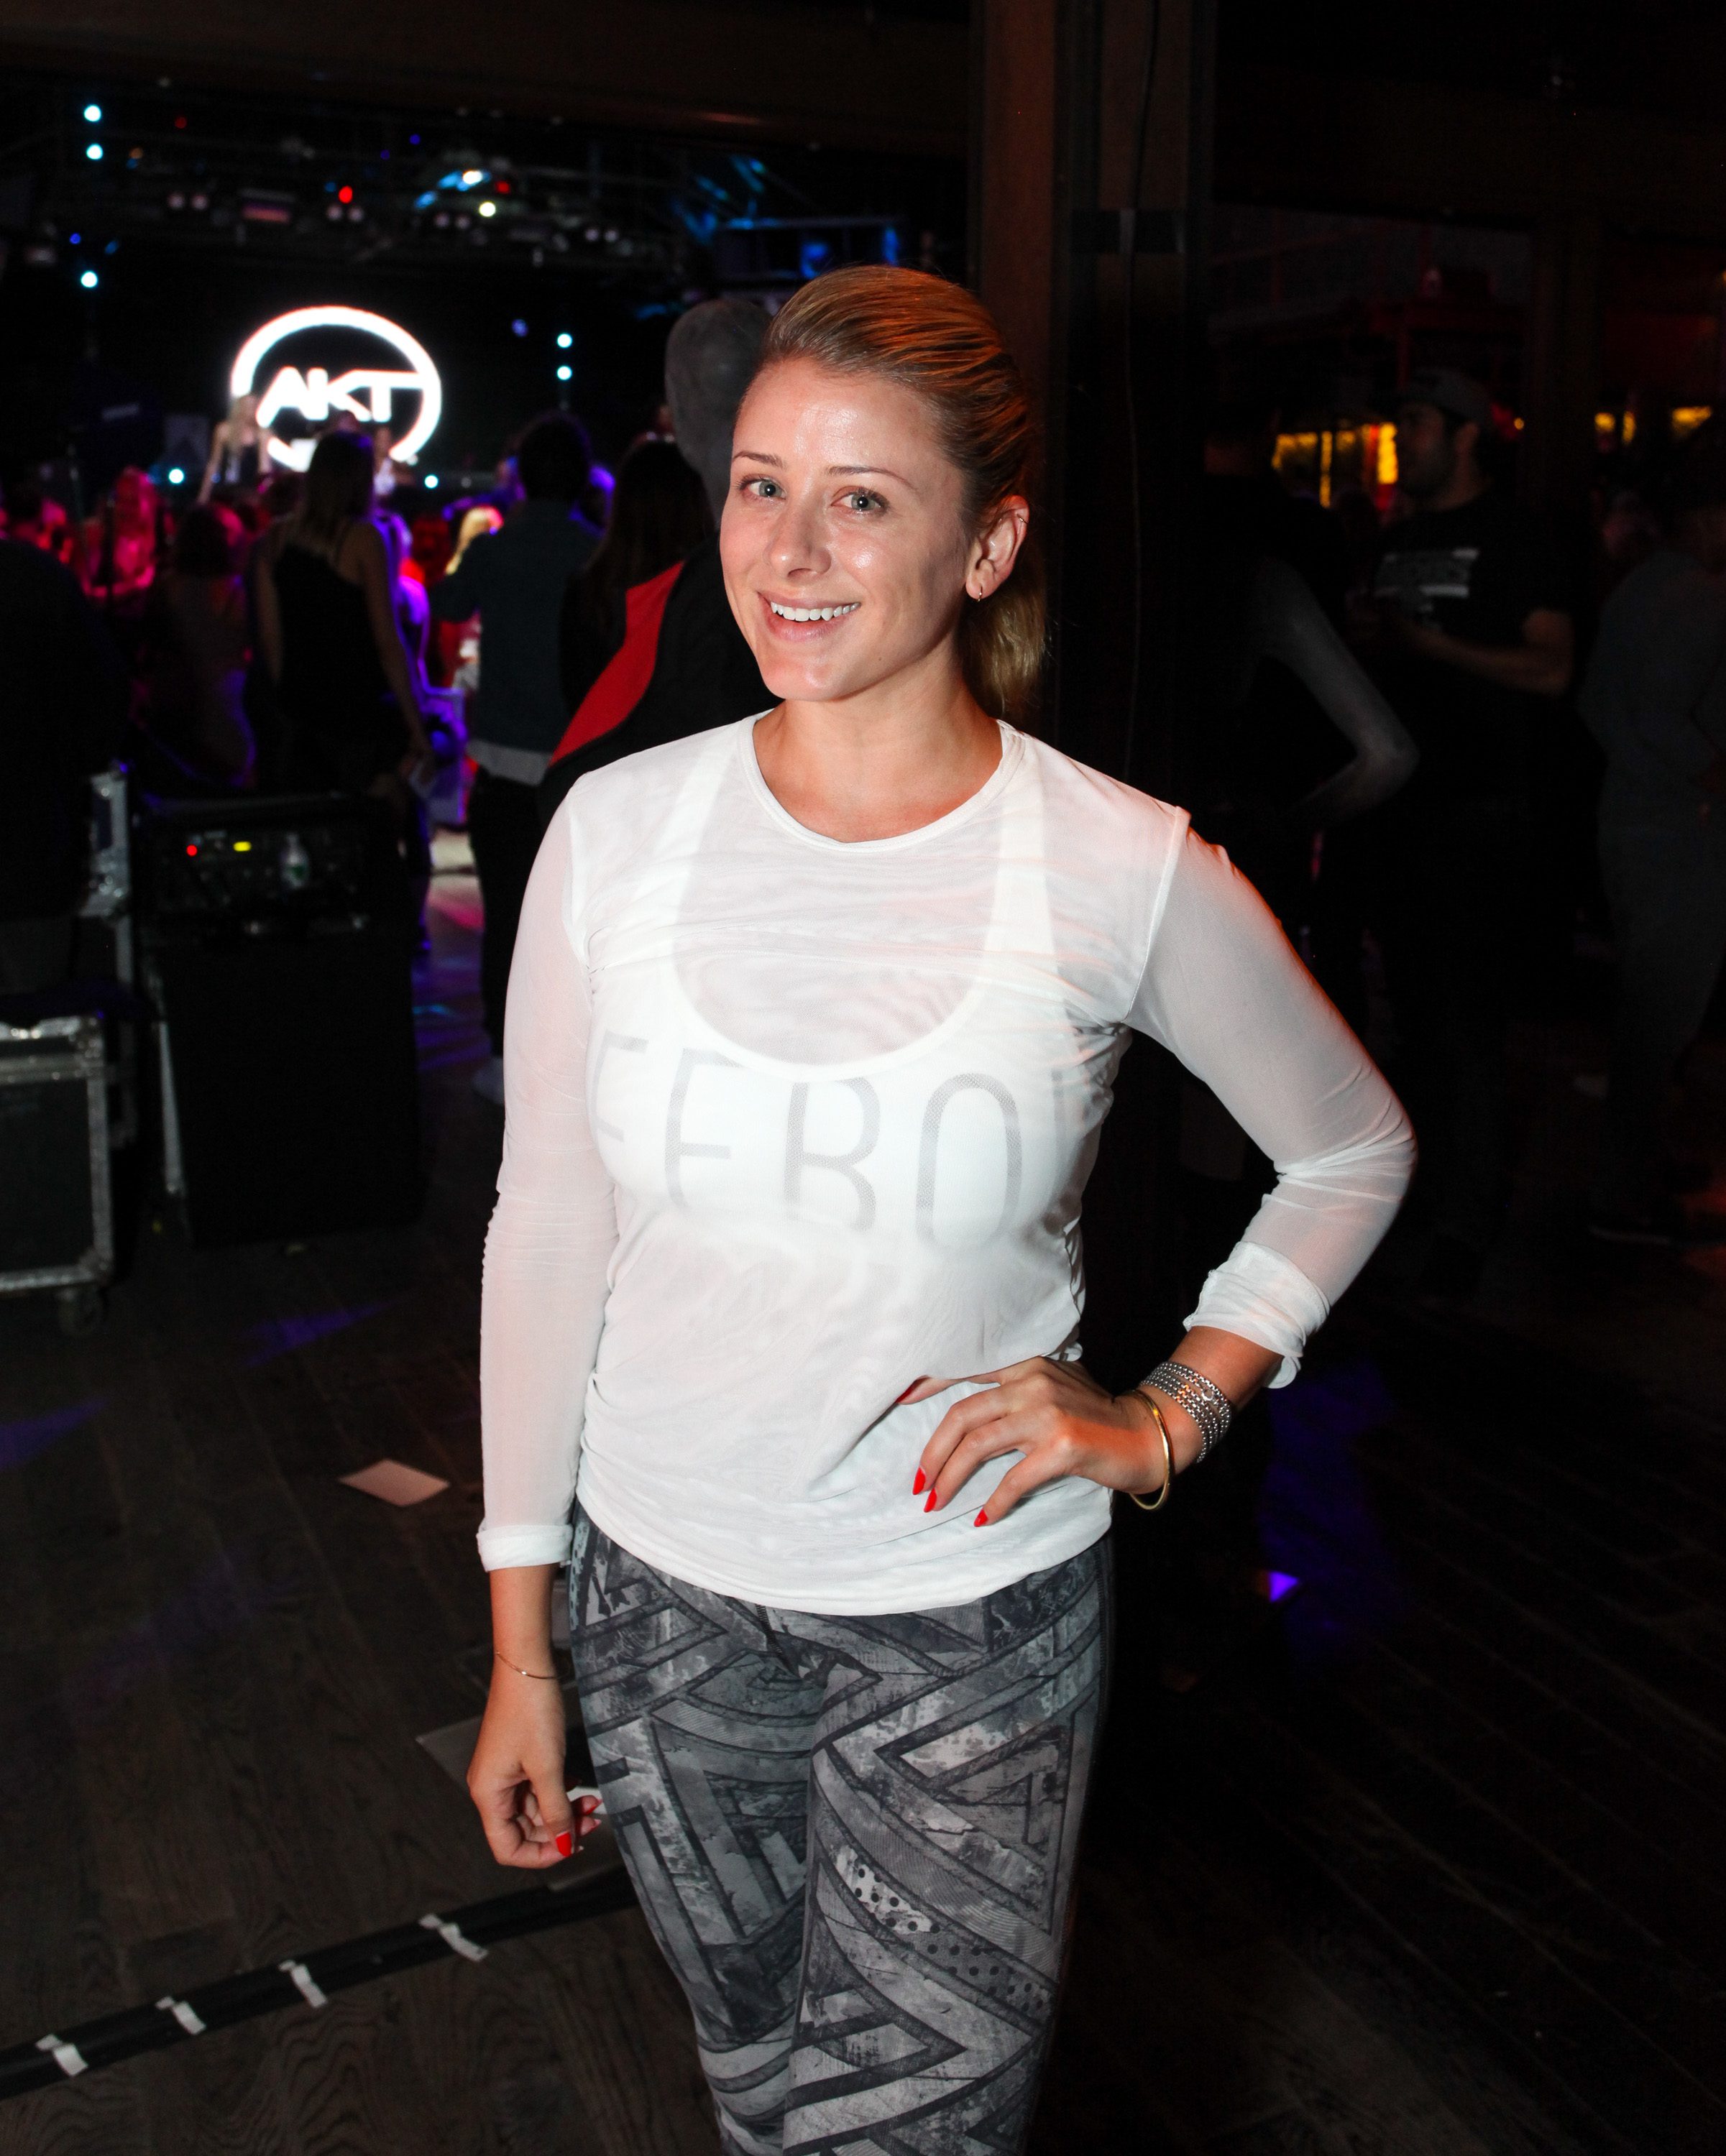 NEW YORK, NY - SEPTEMBER 16: Lo Bosworth attends The Reebok #girlswithgrit showcase at Marquee on September 16, 2015 in New York City. (Photo by Donald Bowers/Getty Images for Reebok)